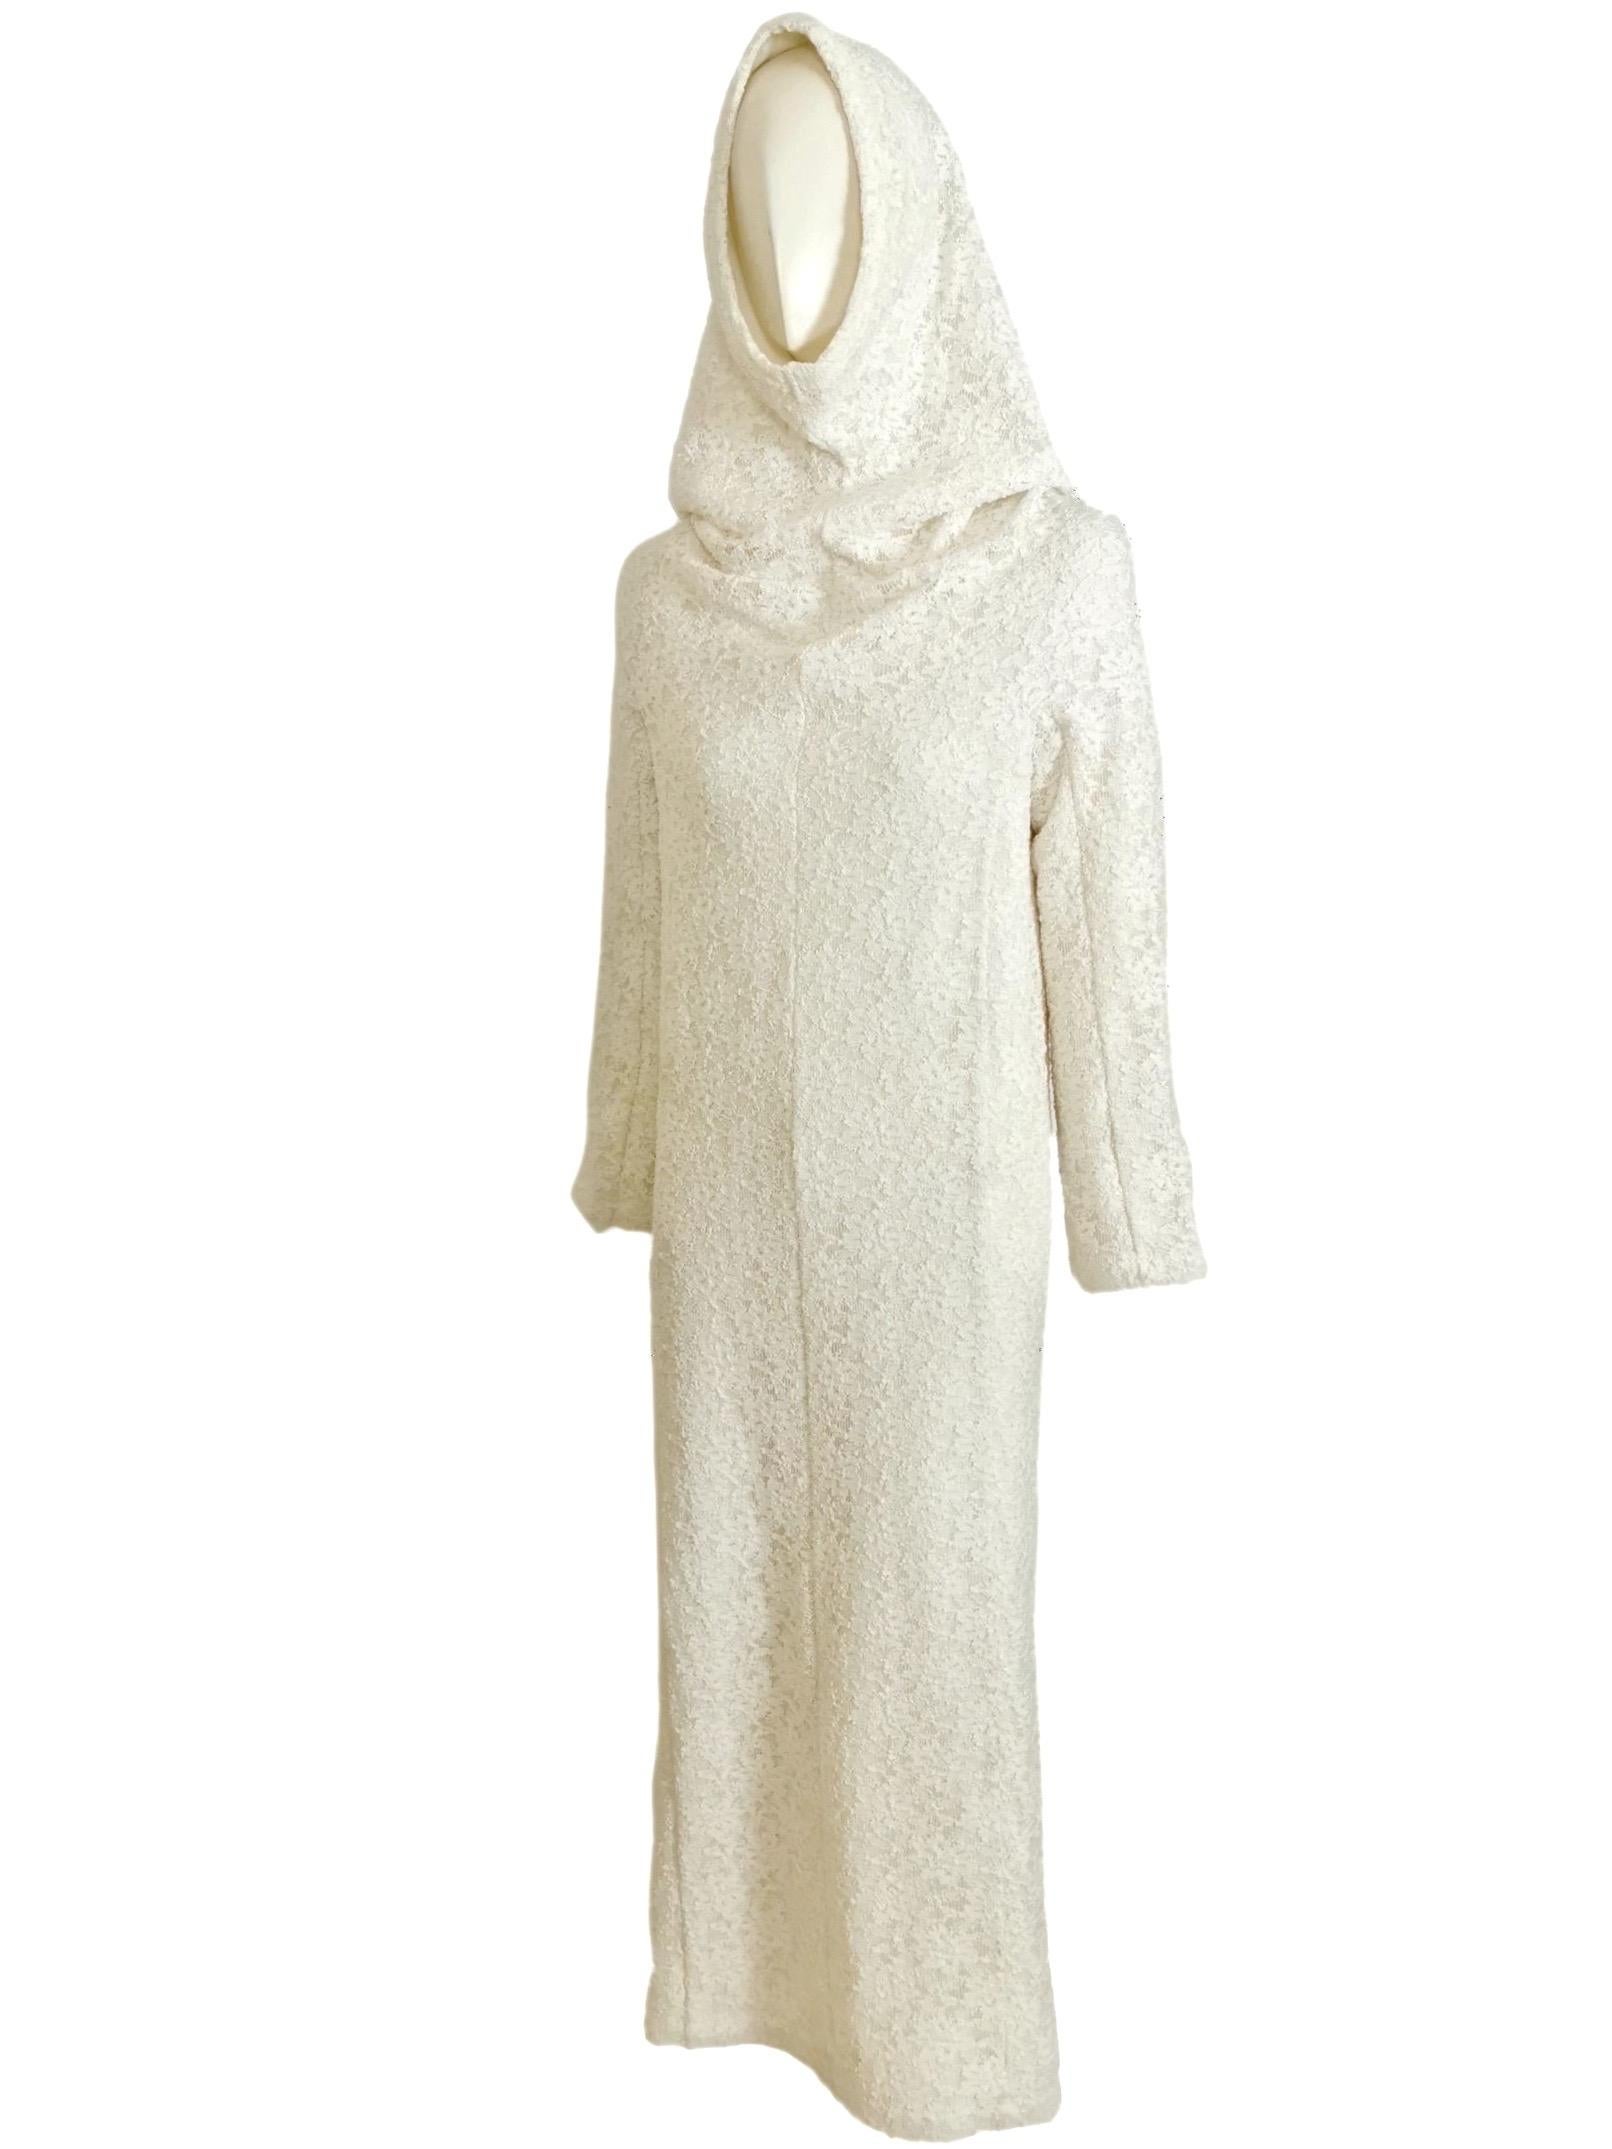 Comme Des Garcons White Drama Cowl Hooded Dress AD 2011 For Sale 9